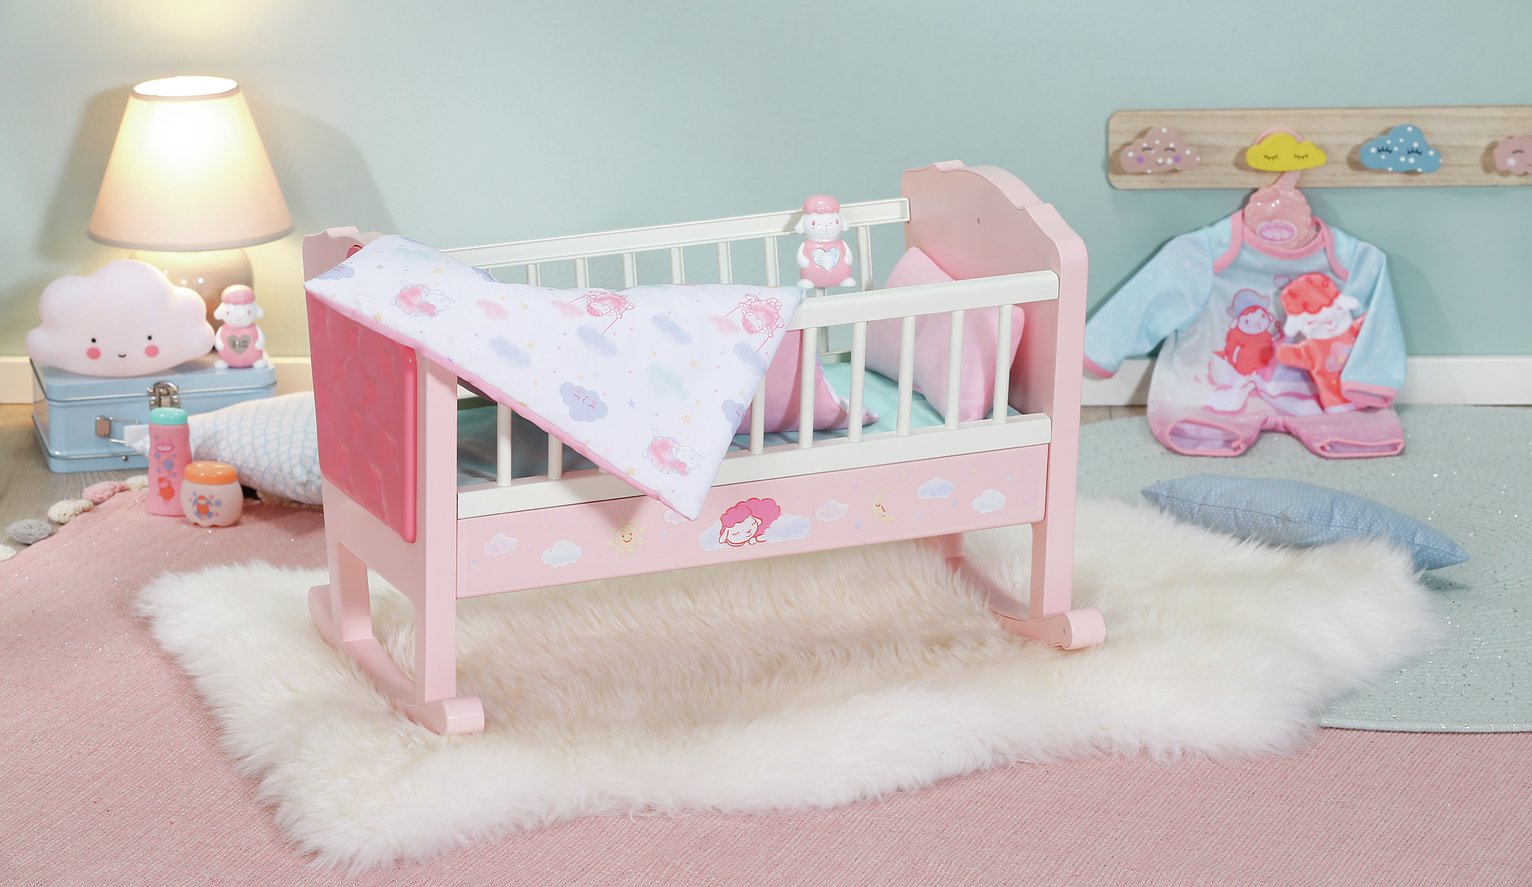 Baby Annabell Sweet Dreams Crib Review